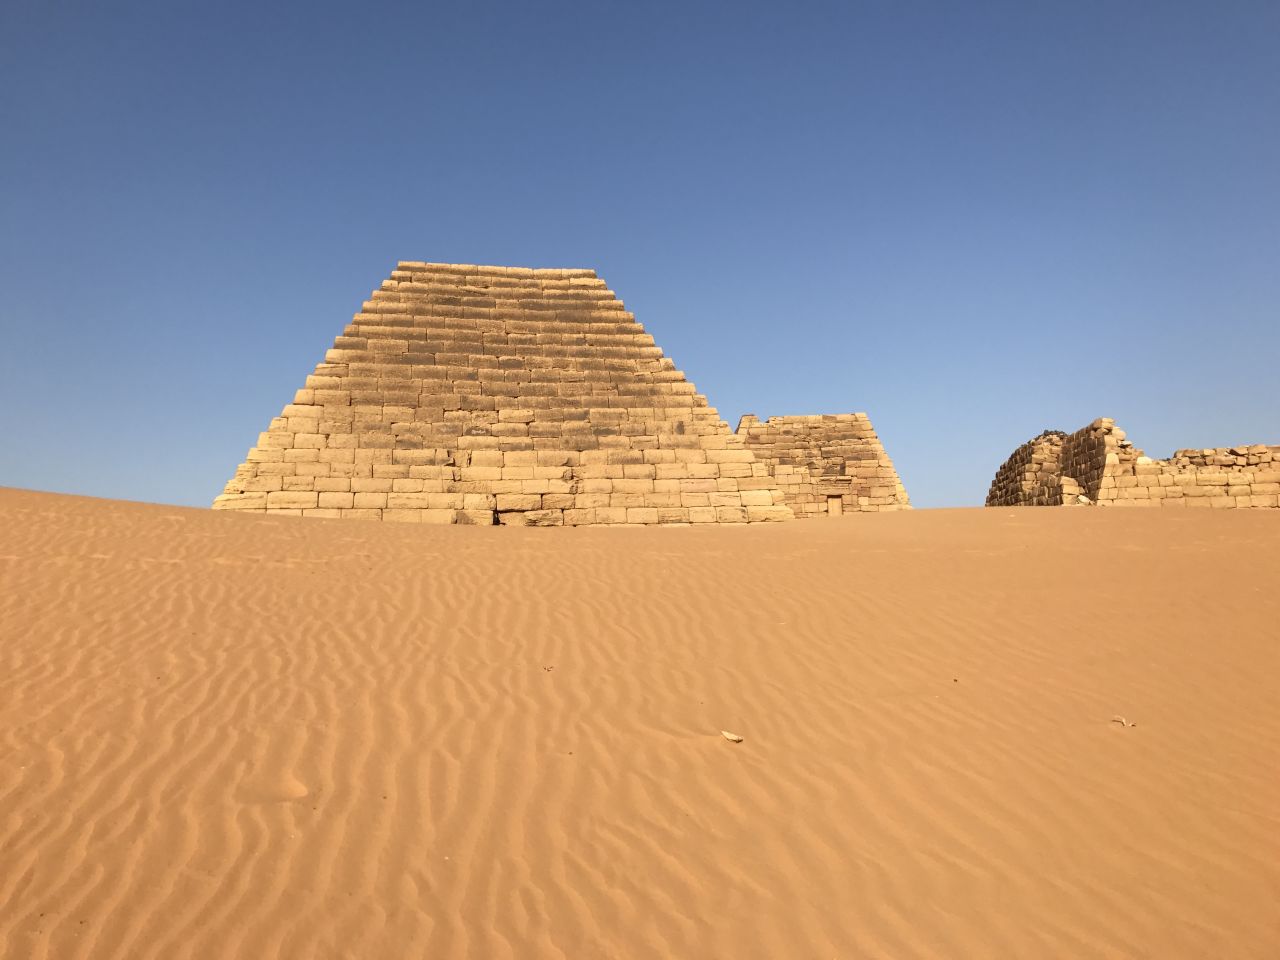 The Sudan pyramids are smaller than those in Egypt. They are also far less busy, typically receiving about 10 visitors per day. <br />